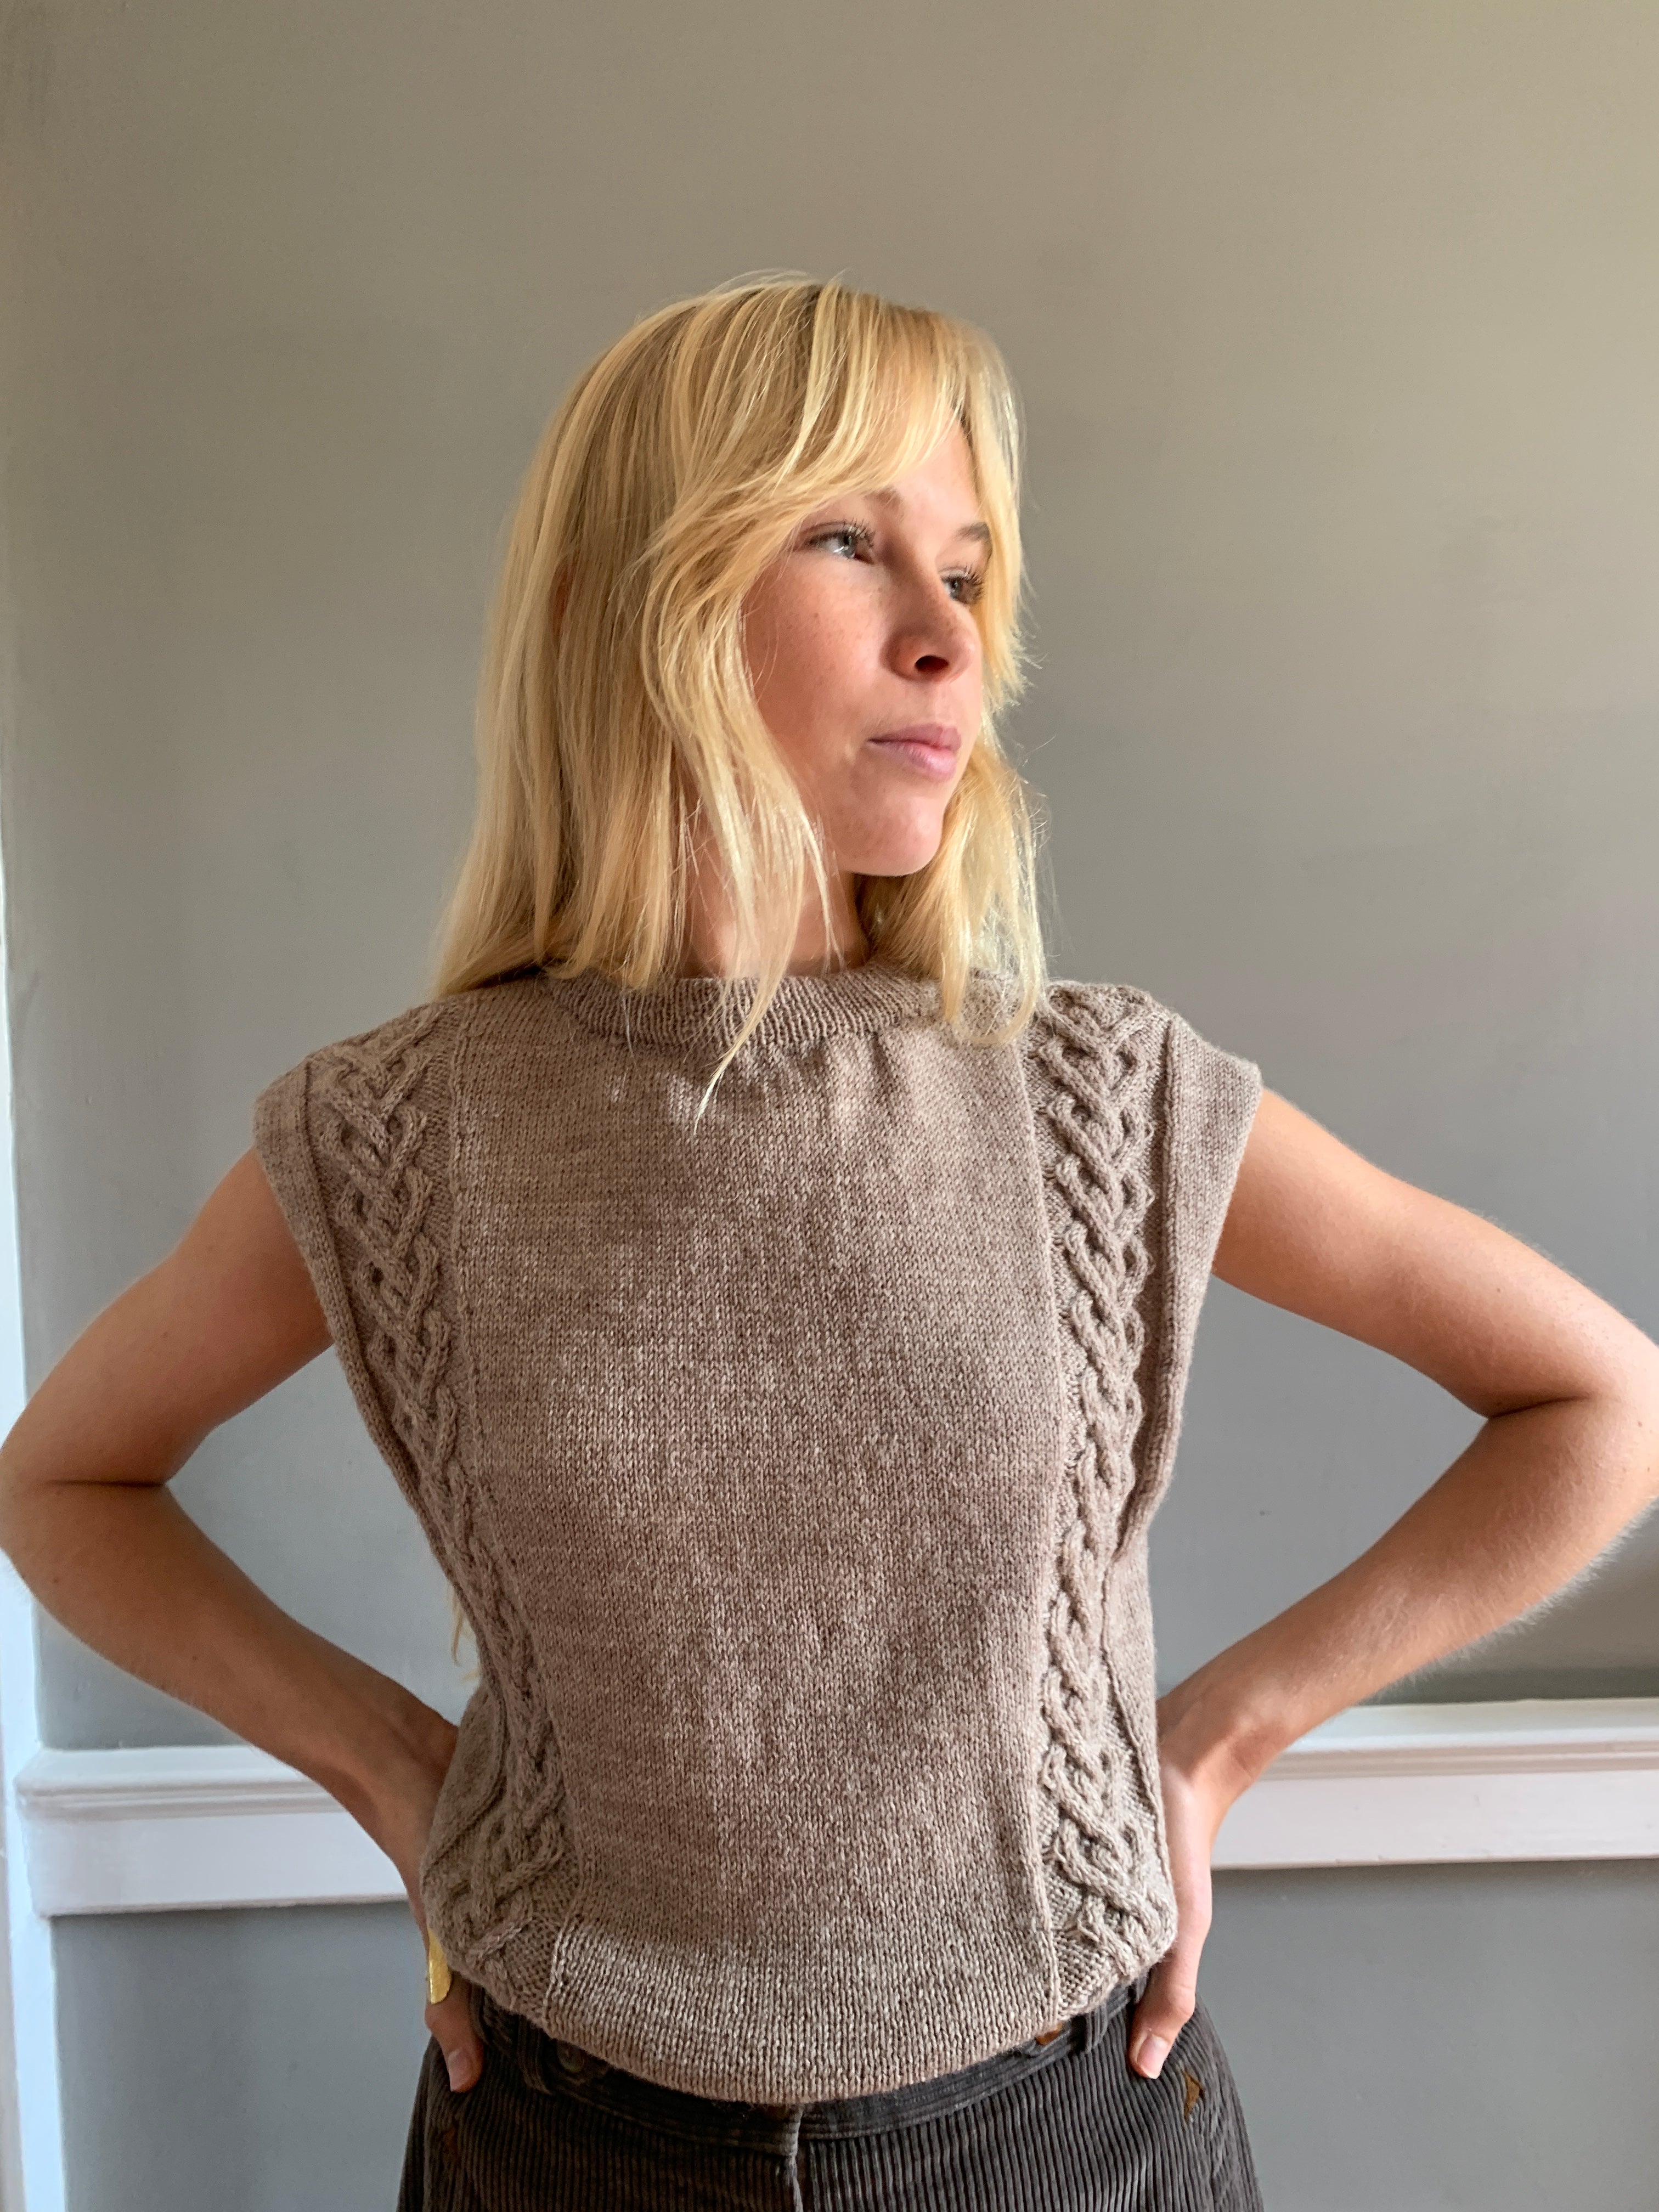 Vintage hand knitted cable tank top